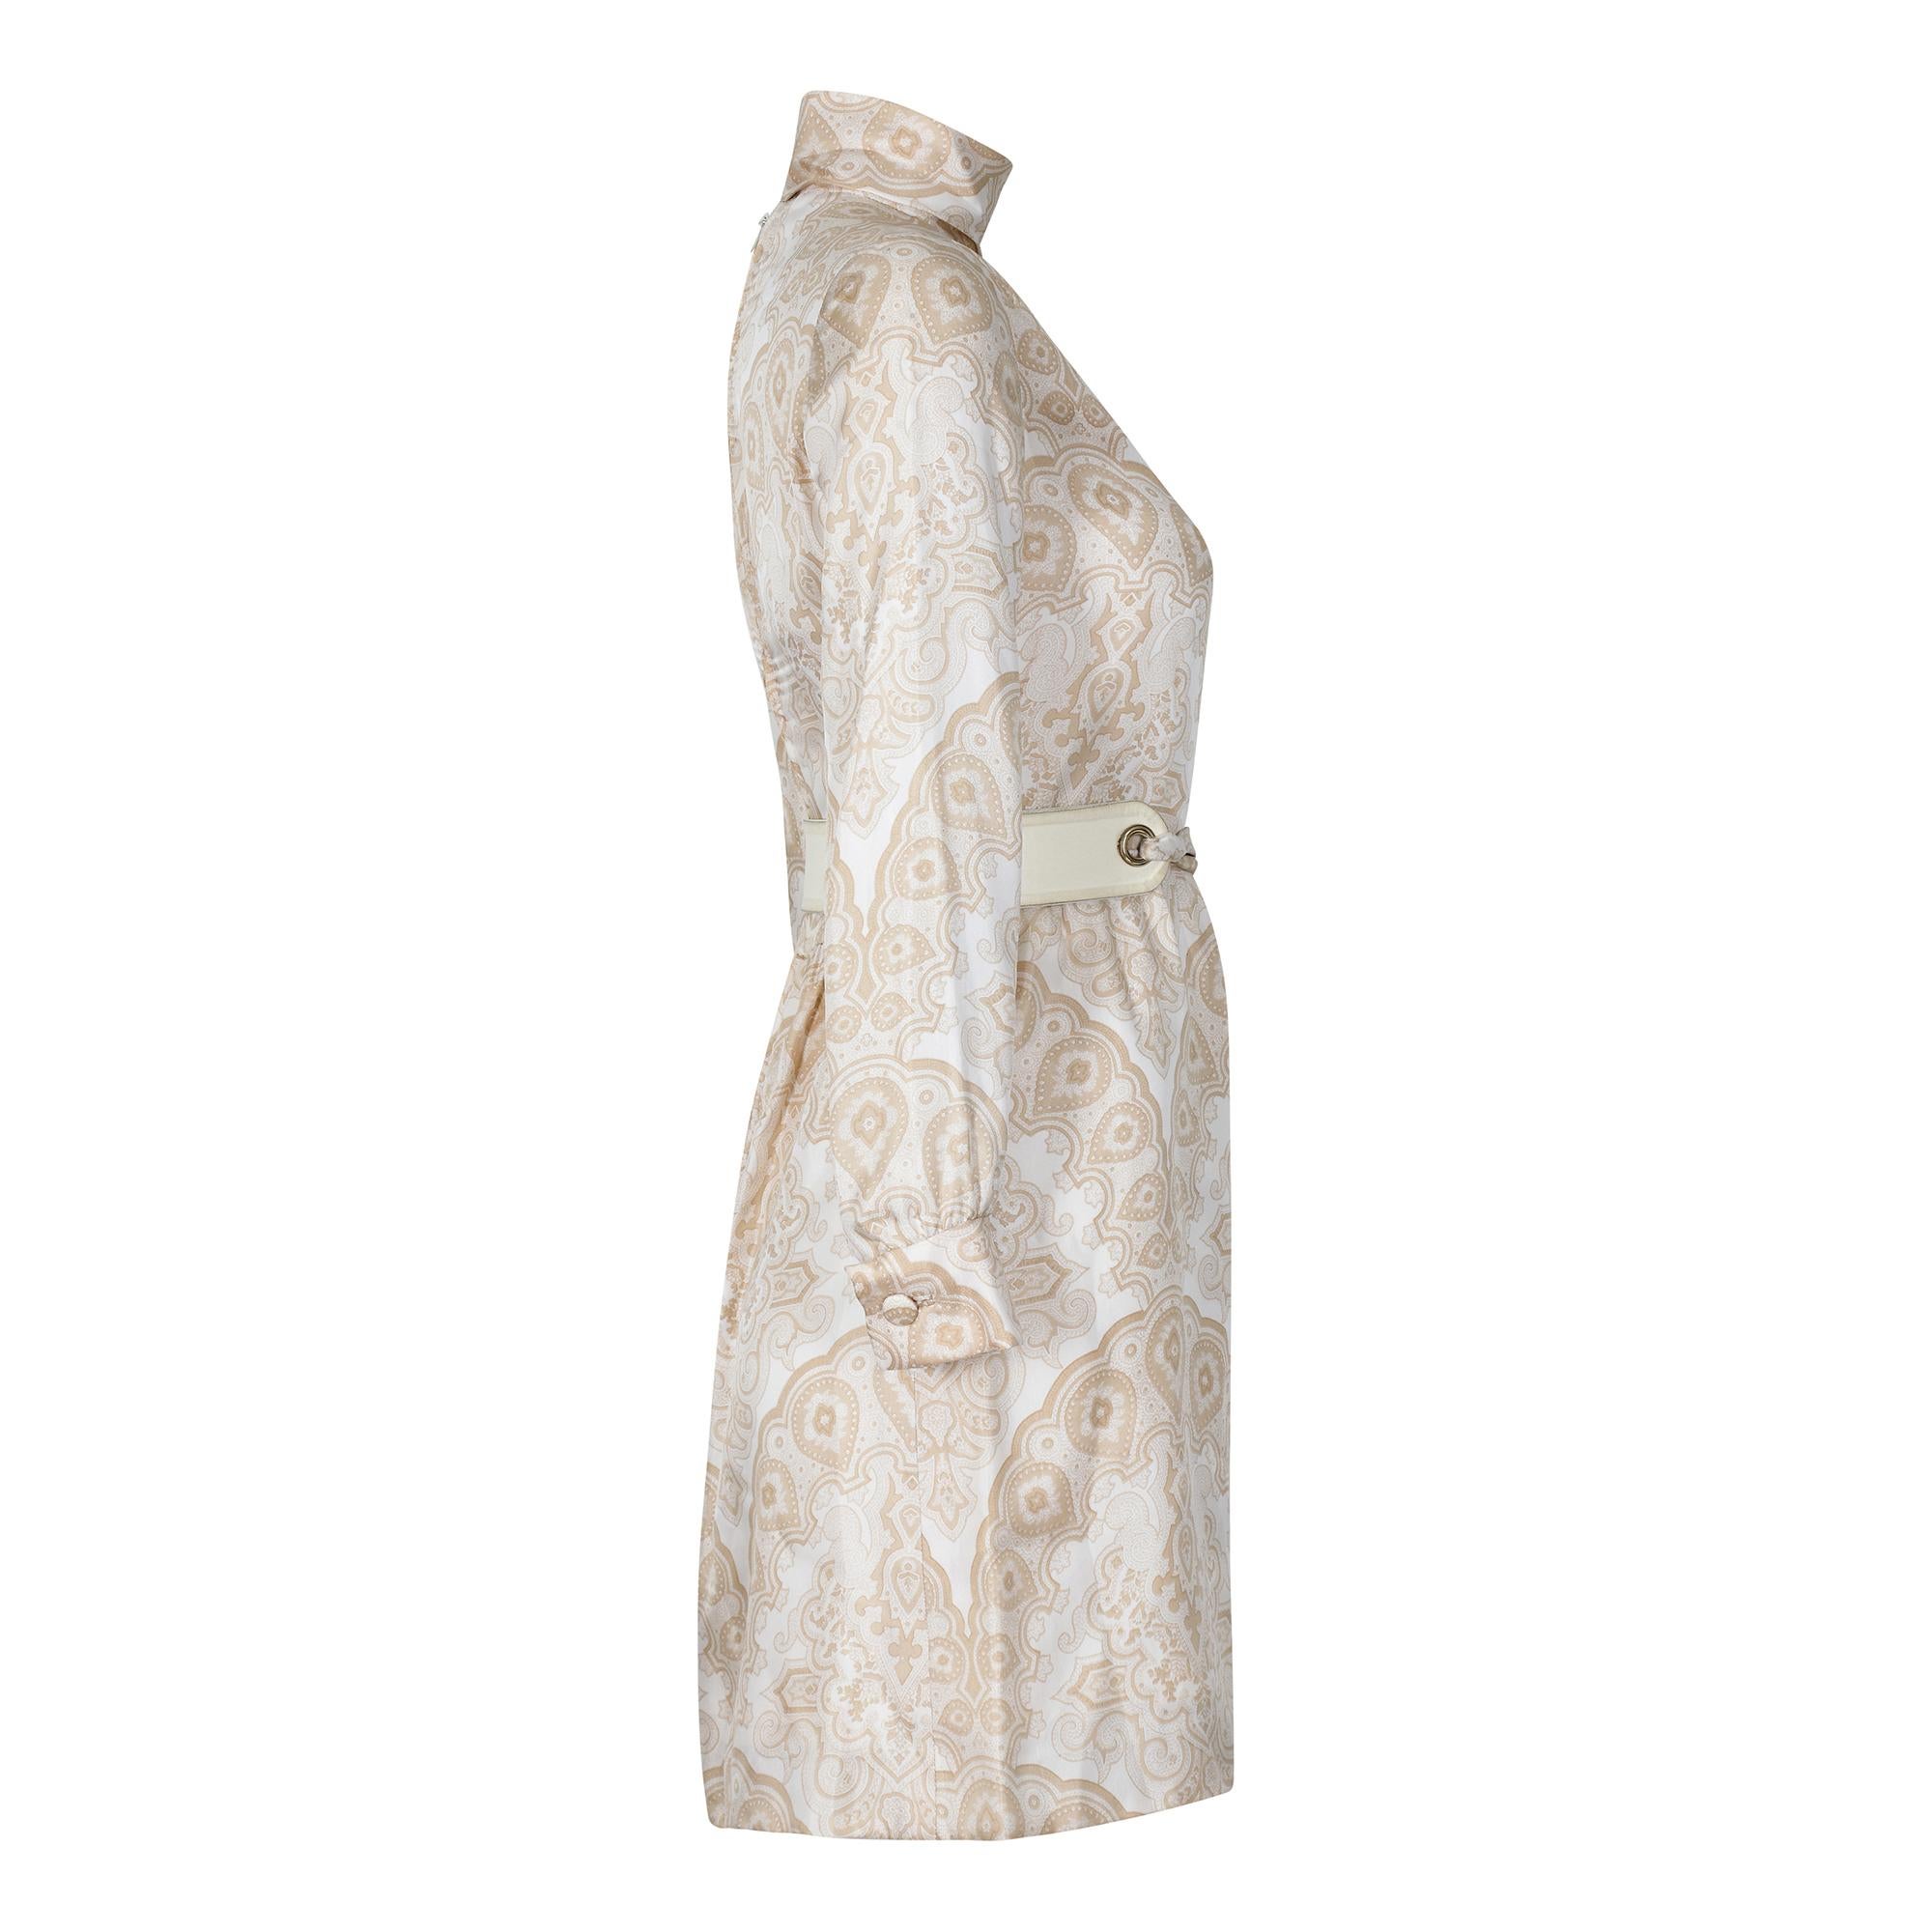 This 1970s silk dress by Christian Dior is classic French chic at its best. It features a high collar, long shirt sleeves with fabric covered buttons on the cuffs and a straight cut skirt that finishes at the top of the knee. The print has an exotic